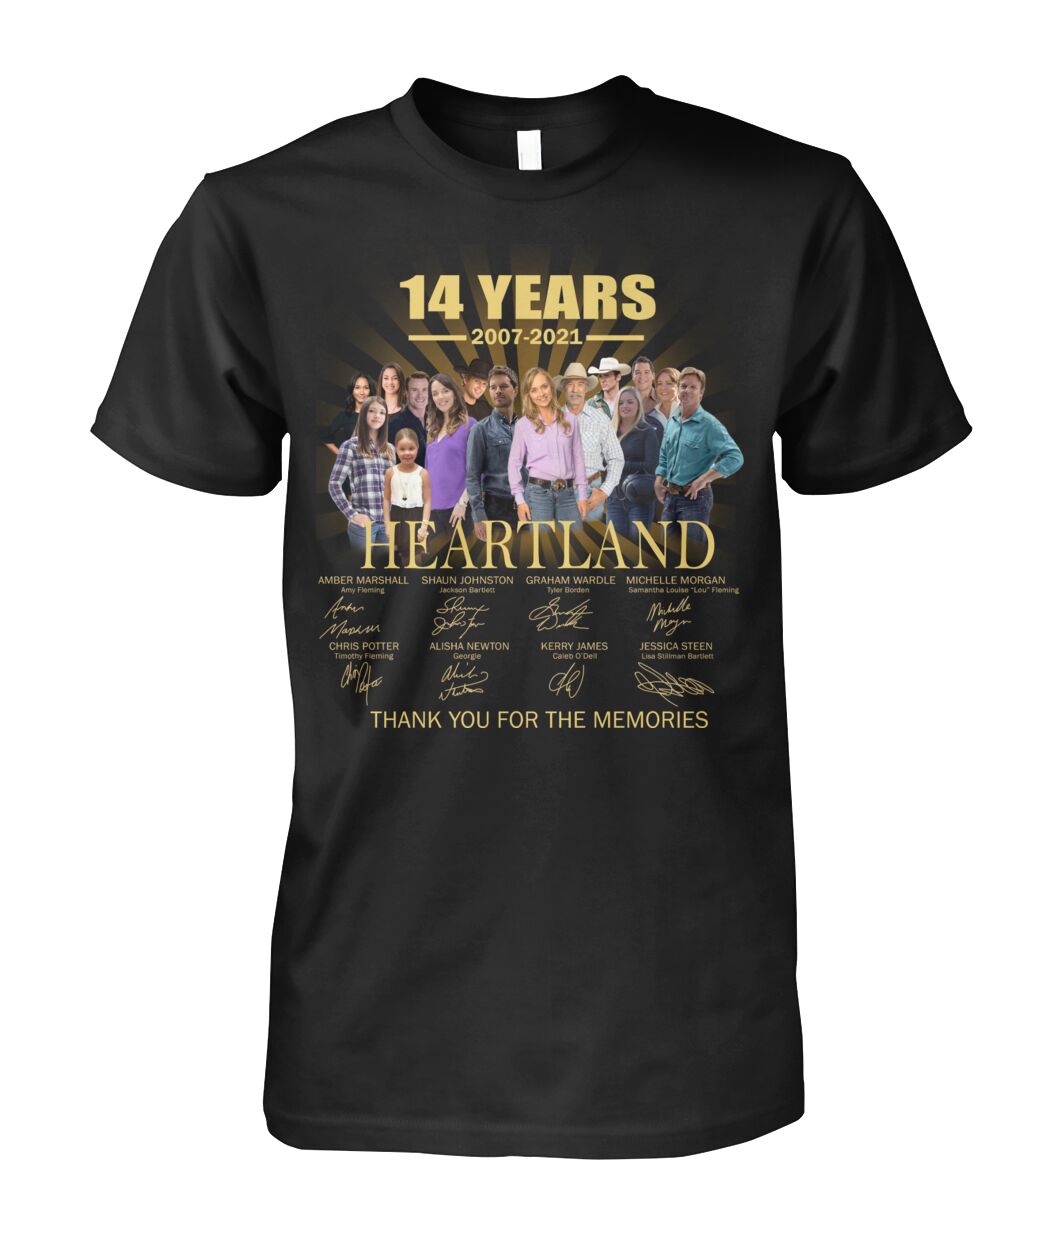 14 years Heartland signature thank you for the memories shirt